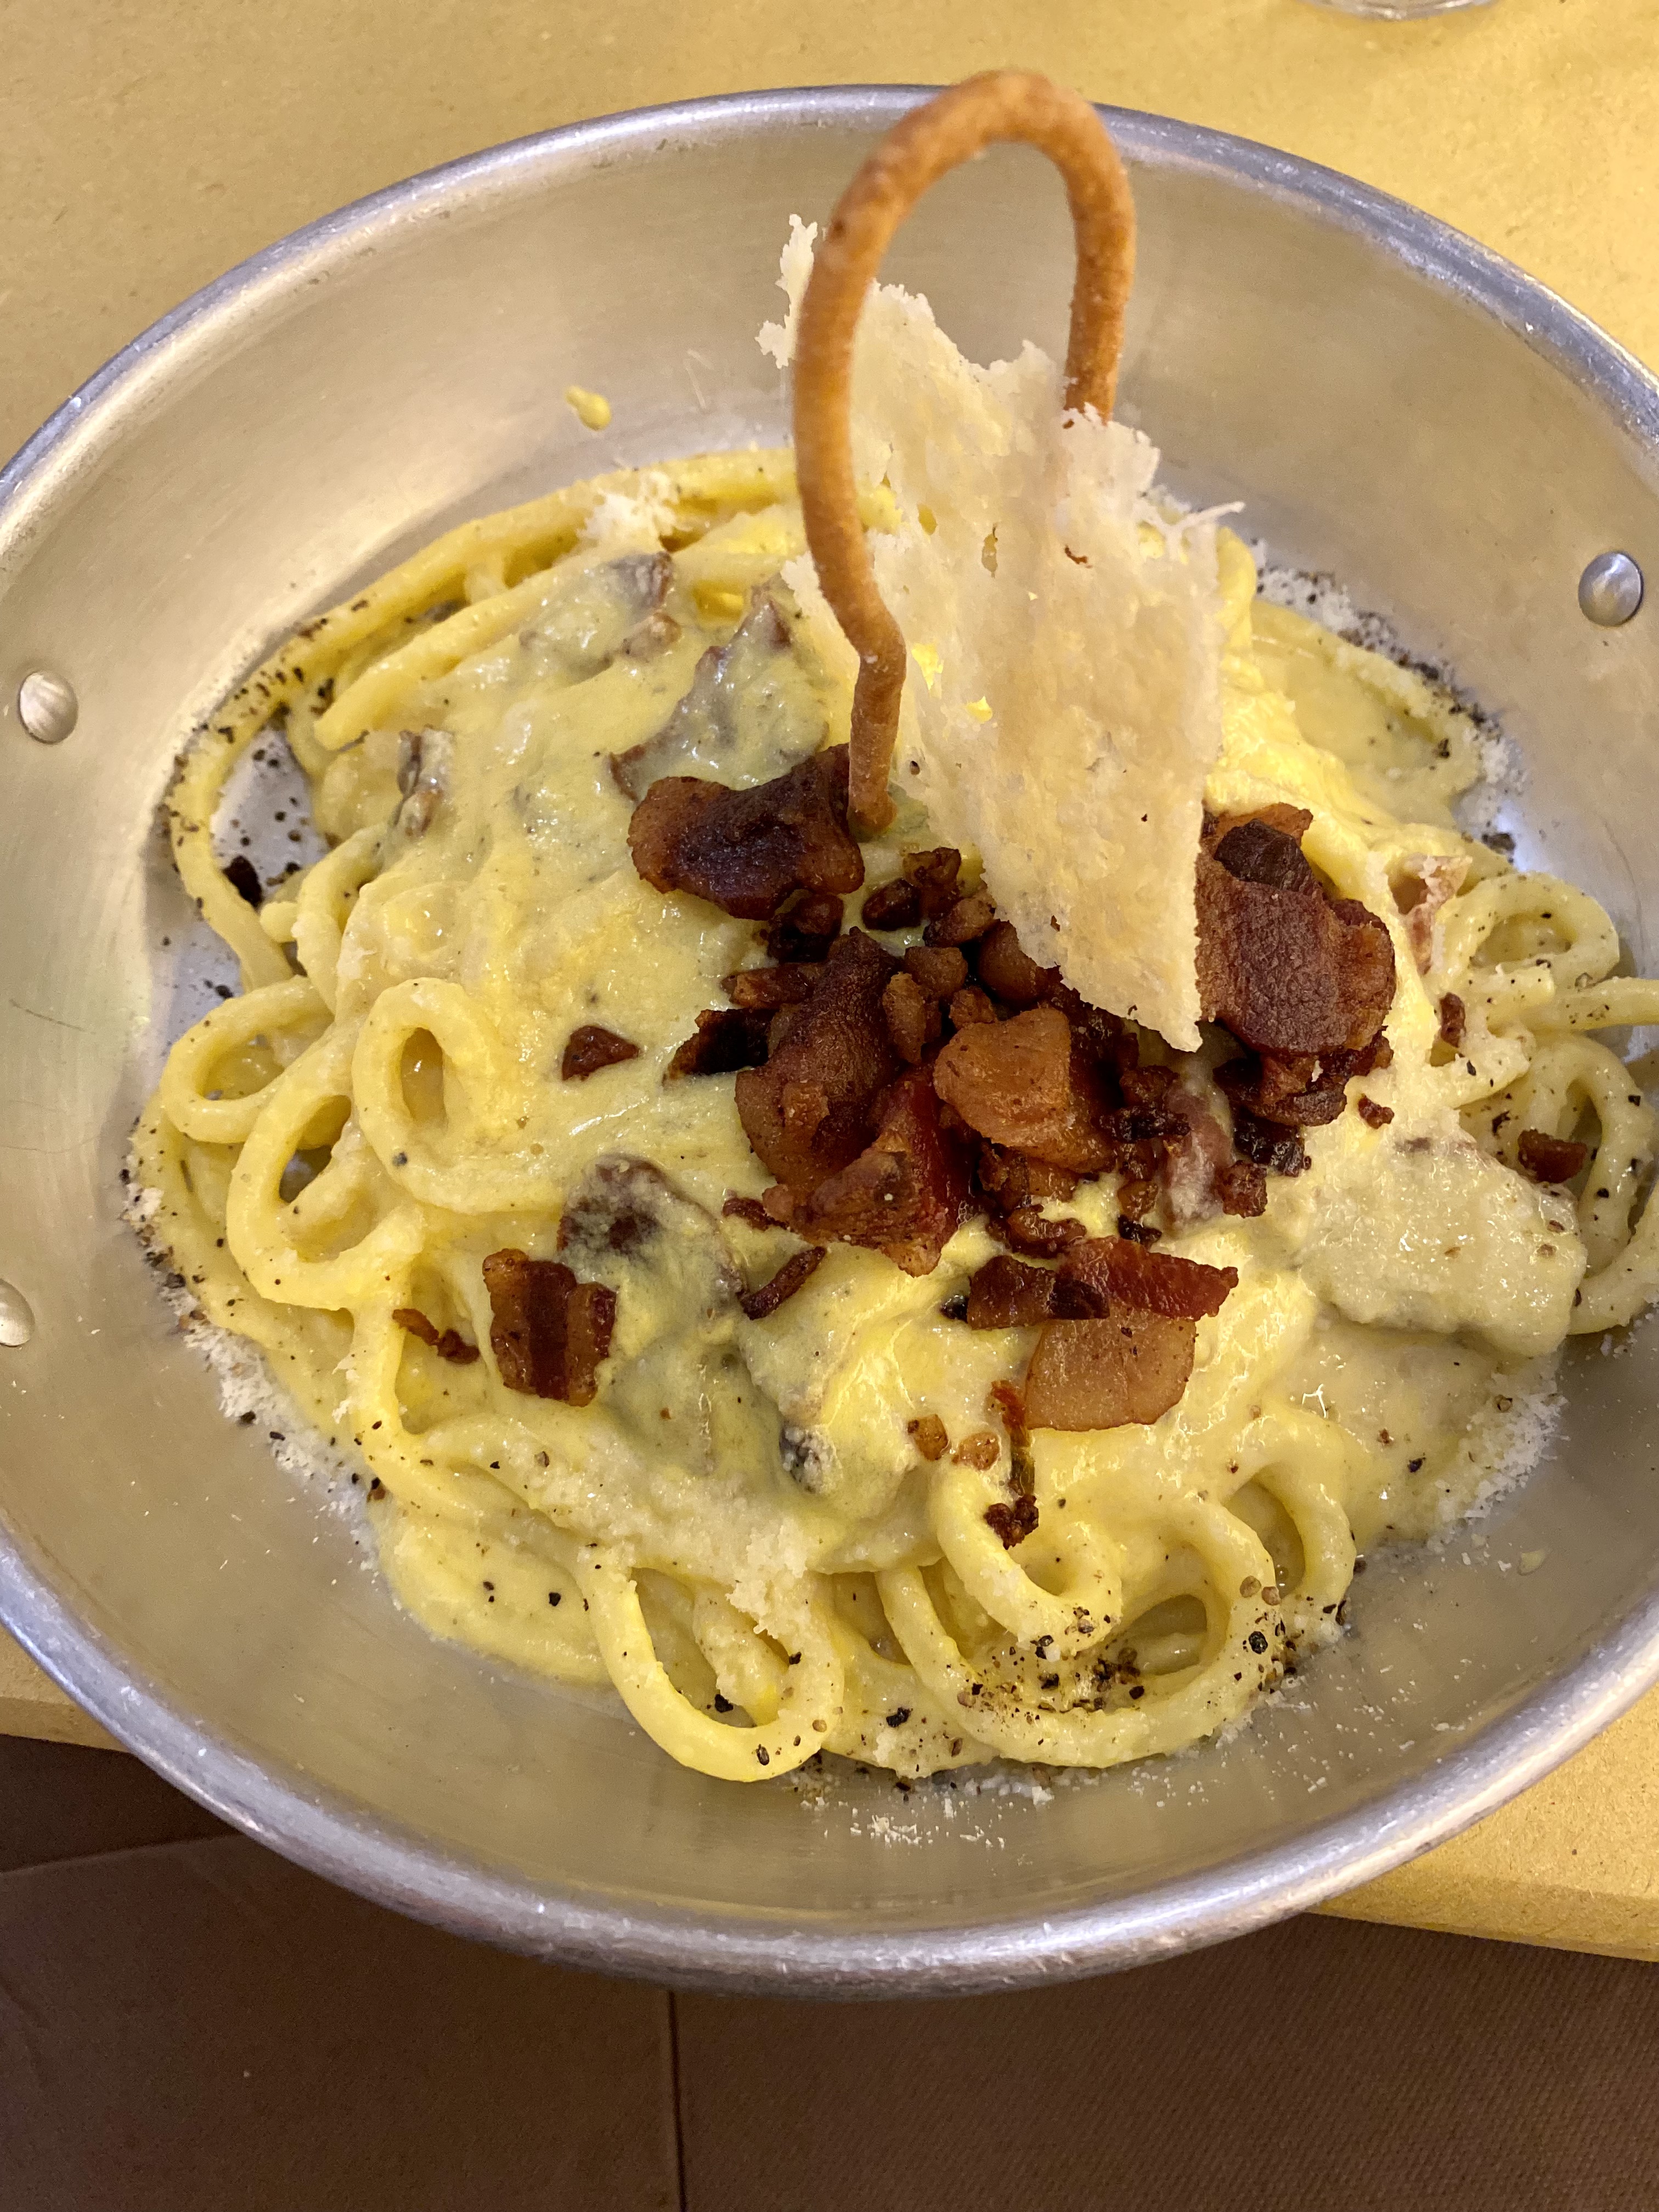 A Carbonara Recipe To Make Your Mouth Water